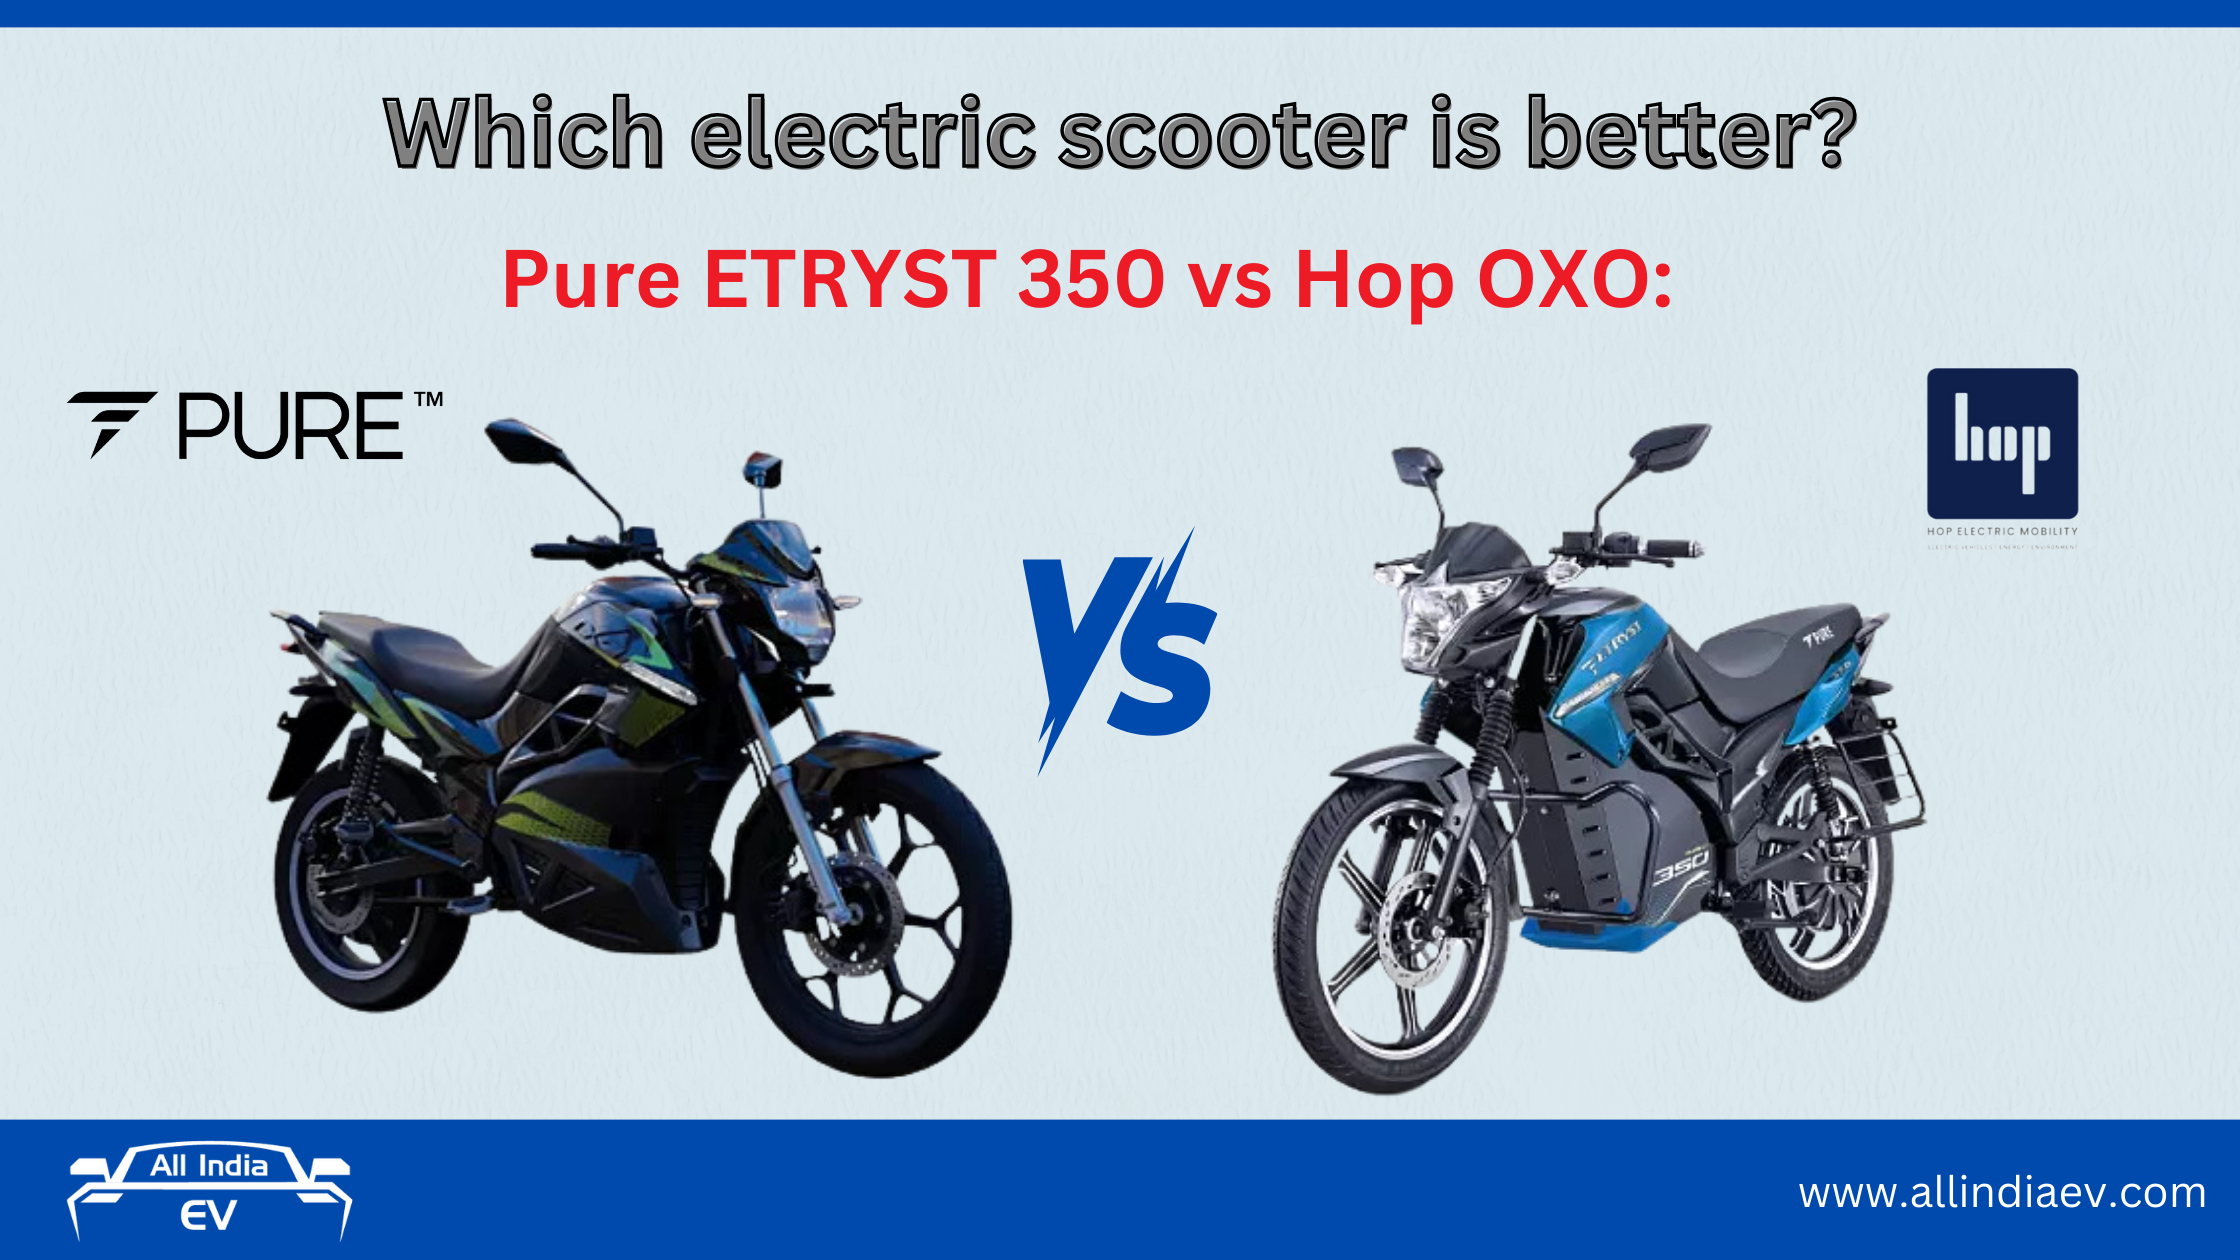 Pure ETRYST 350 vs Hop OXO: Which electric scooter is better?